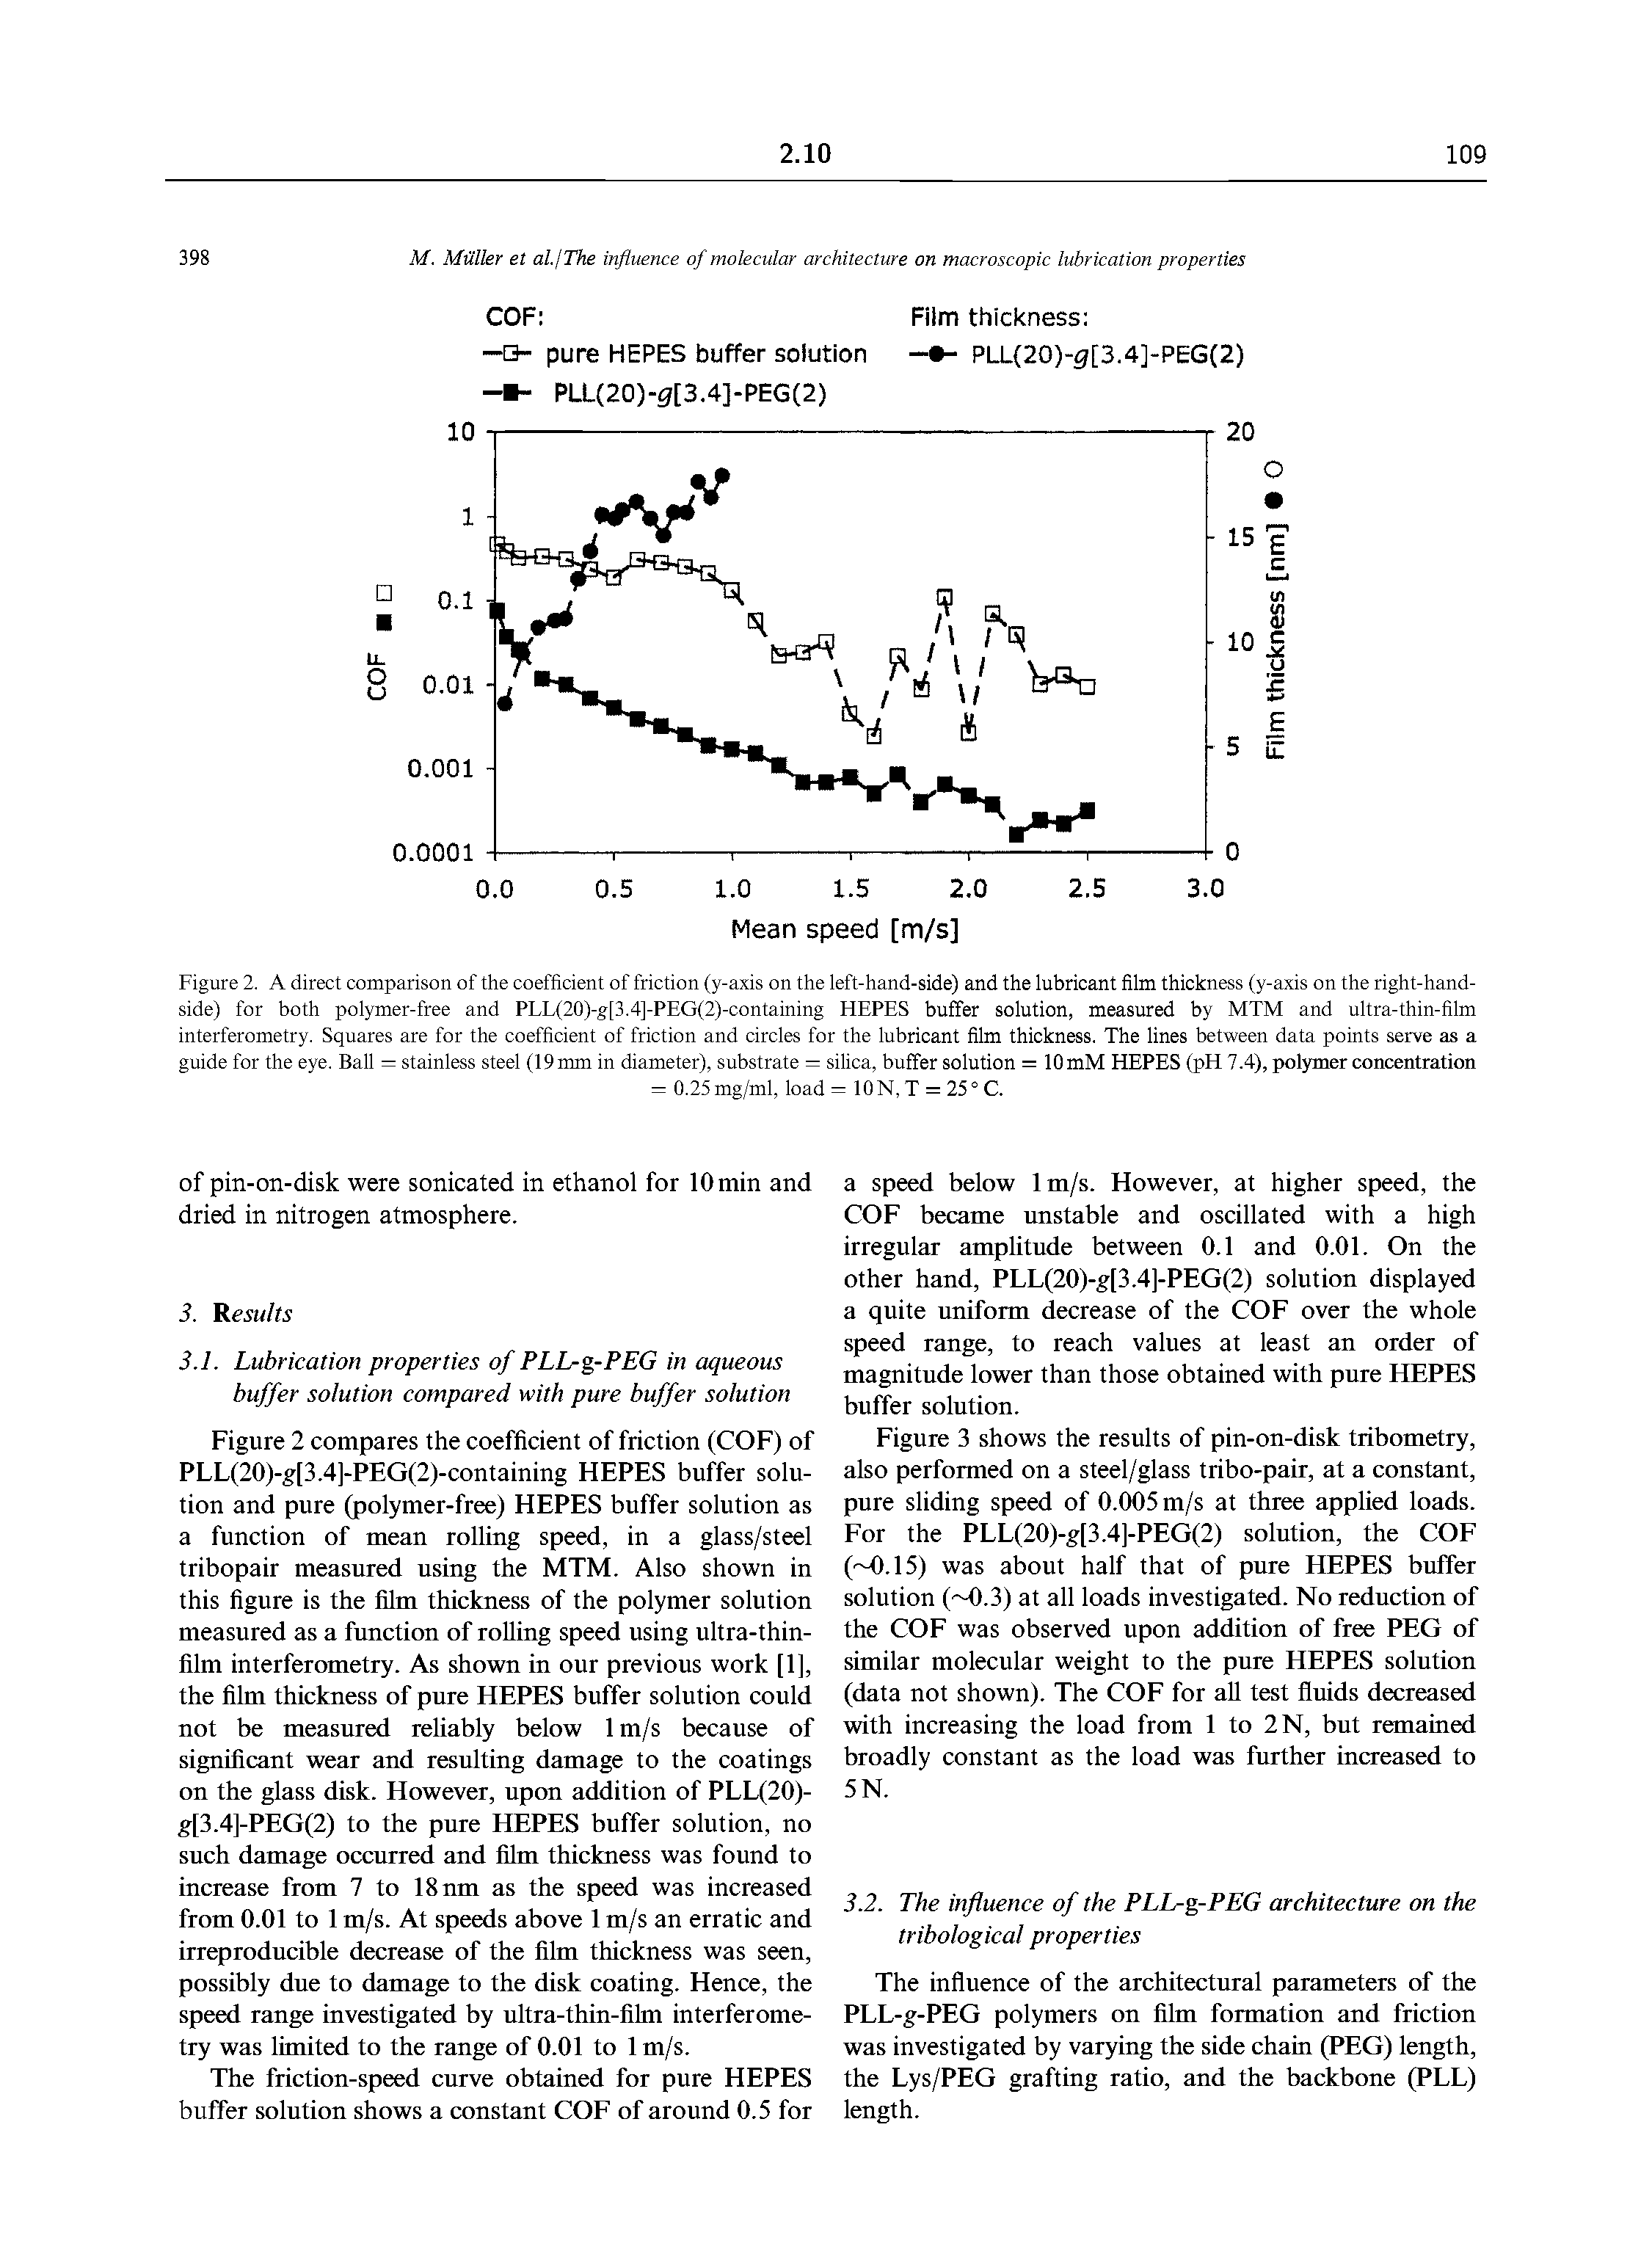 Figure 2. A direct comparison of the coefficient of friction (y-axis on the left-hand-side) and the lubricant film thickness (y-axis on the right-hand-side) for both polymer-free and PLL(20)-g[3.4]-PEG(2)-containing HEPES buffer solution, measured by MTM and ultra-thin-fihn interferometry. Squares are for the coefficient of friction and circles for the lubricant film thickness. The lines between data points serve as a guide for the eye. Ball = stainless steel (19 mm in diameter), substrate = silica, buffer solution = 10 mM HEPES (pH 7.4), polymer concentration...